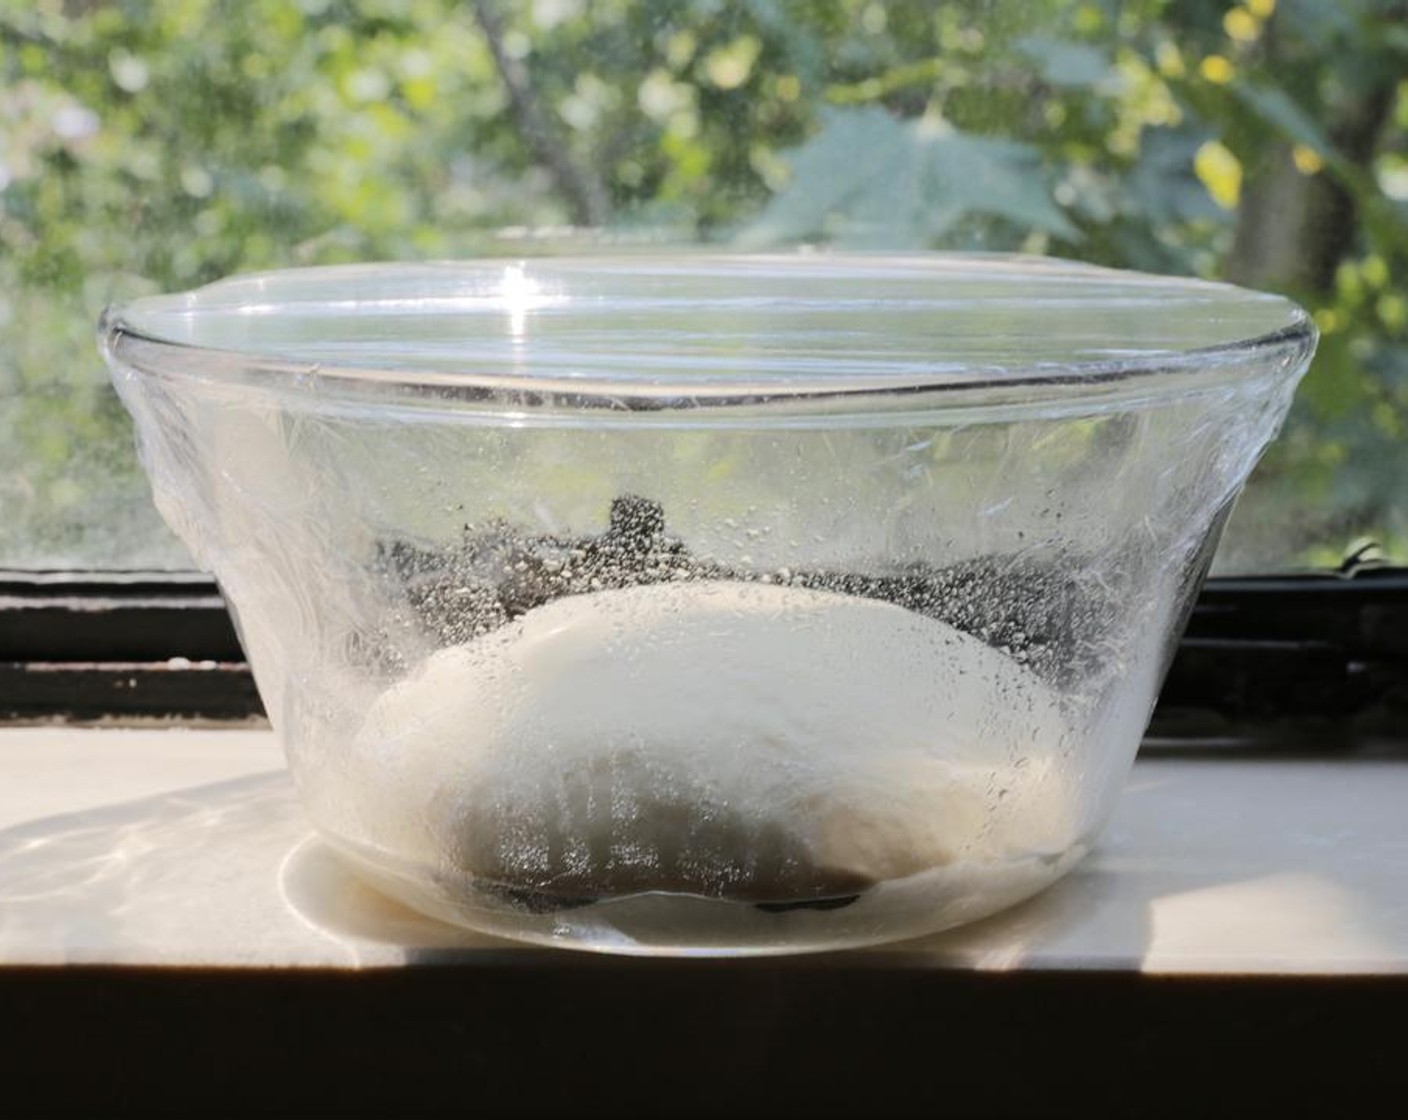 step 4 Place the dough in a lightly-oiled bowl, cover with plastic and place in a warm place to prove for about 2 hours.